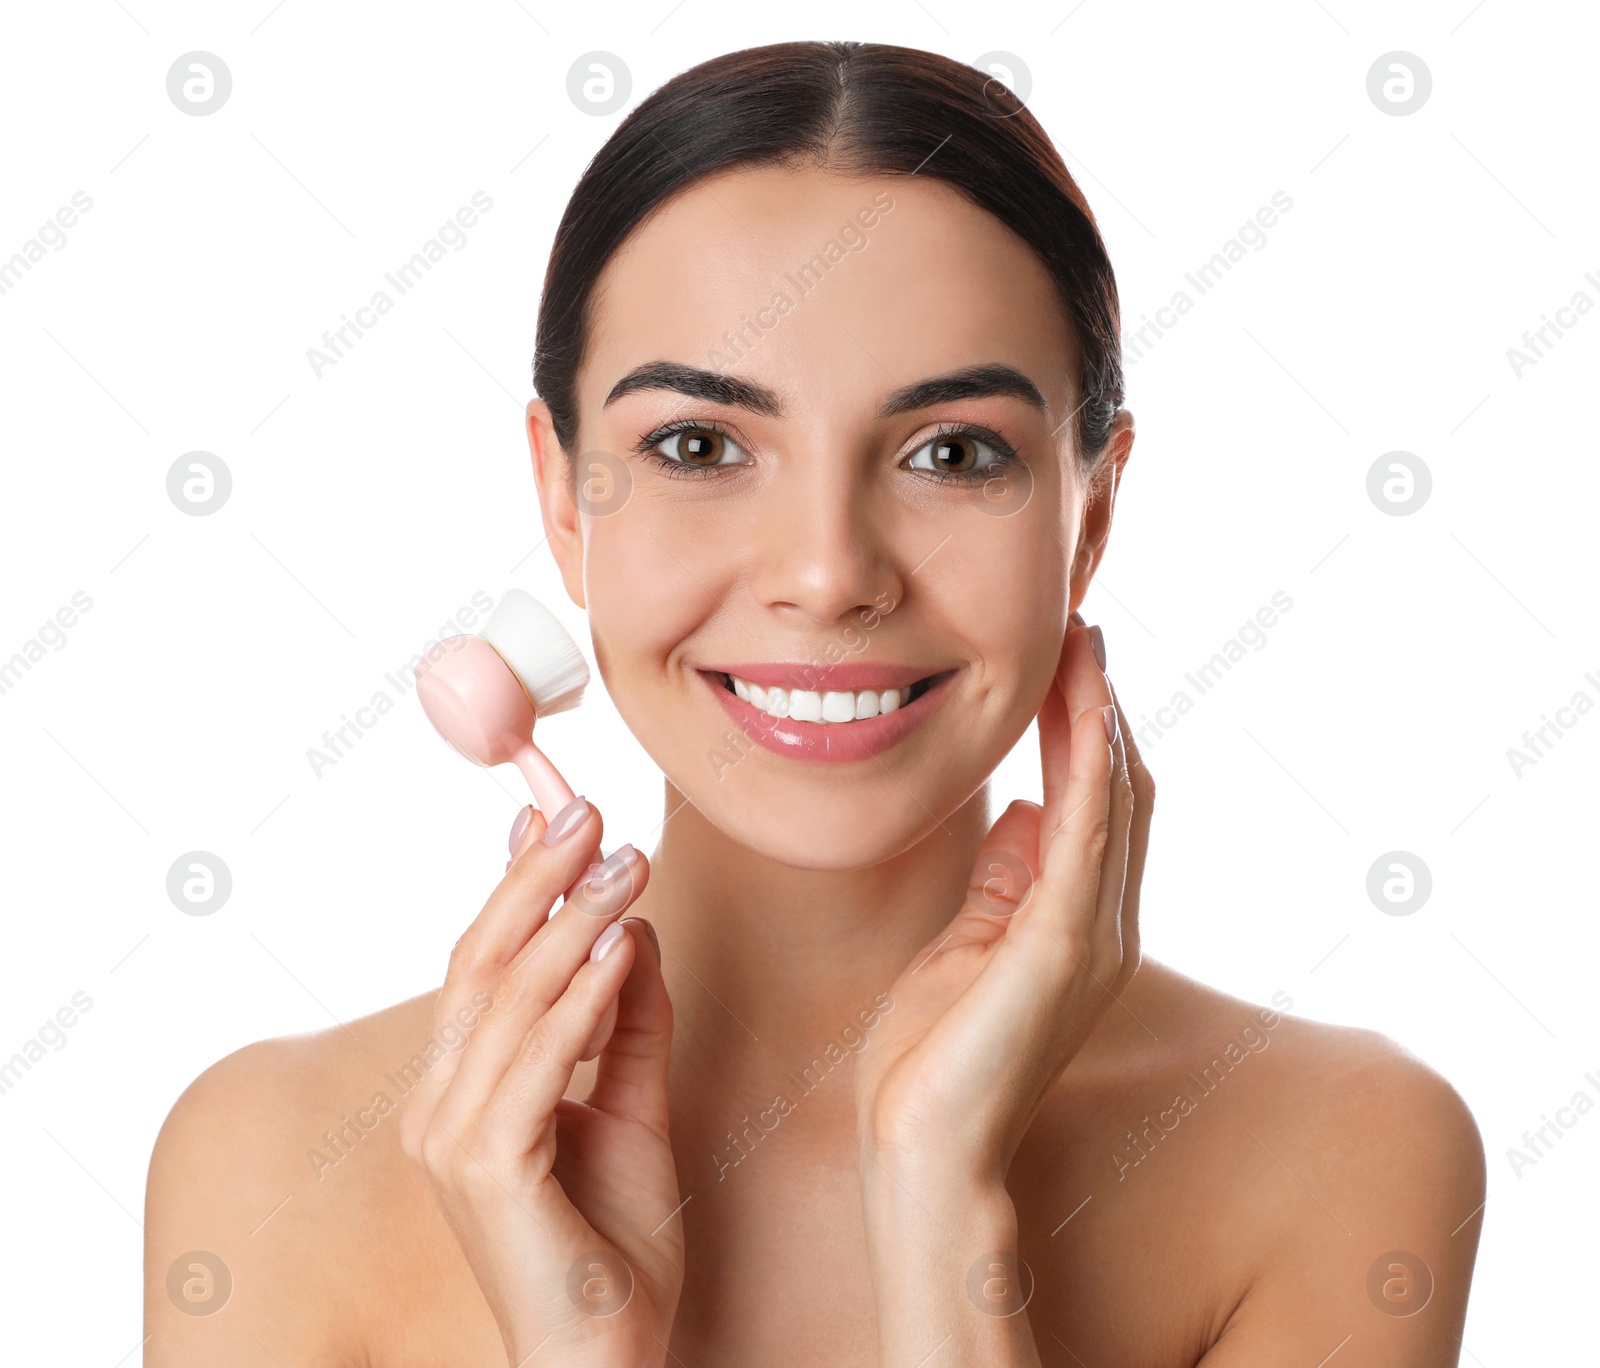 Photo of Young woman using facial cleansing brush on white background. Washing accessory